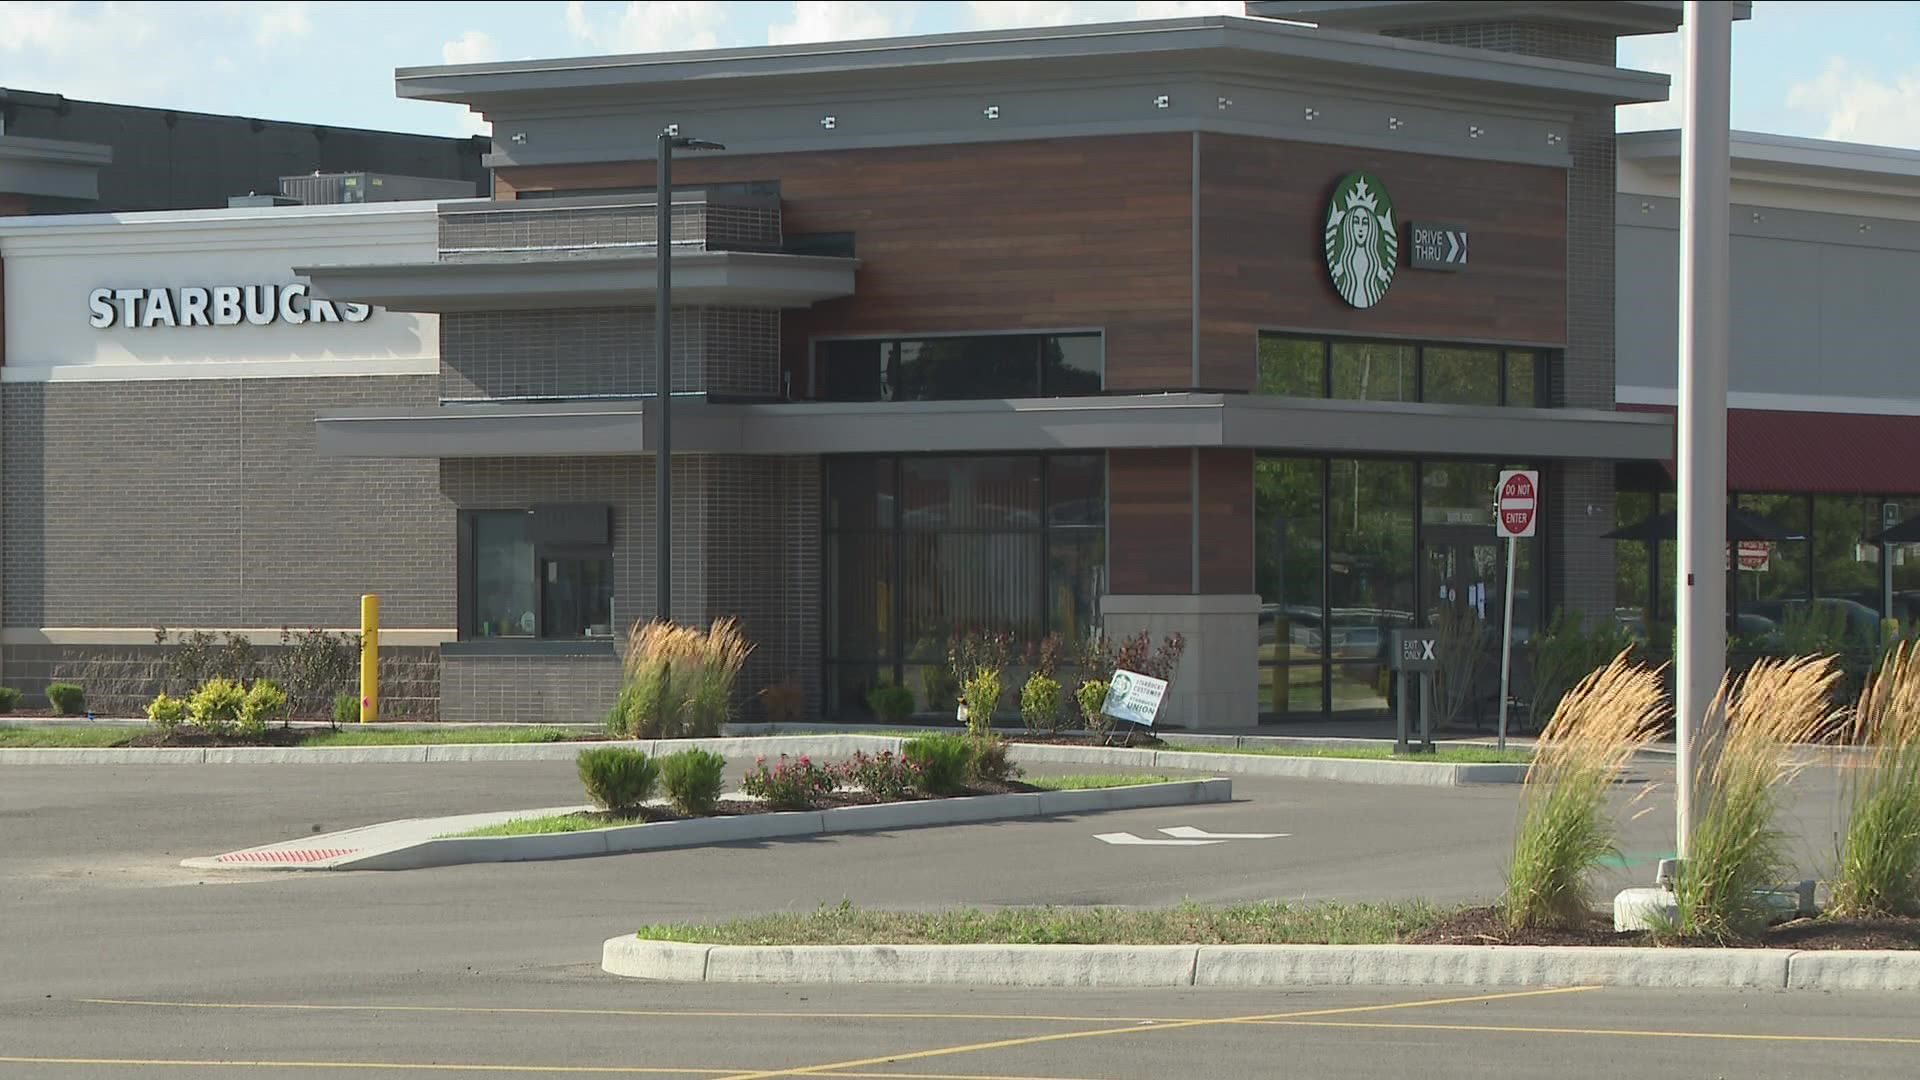 Starbucks workers in Tonawanda walked out in protest for a second straight day, after a shift supervisor was fired.